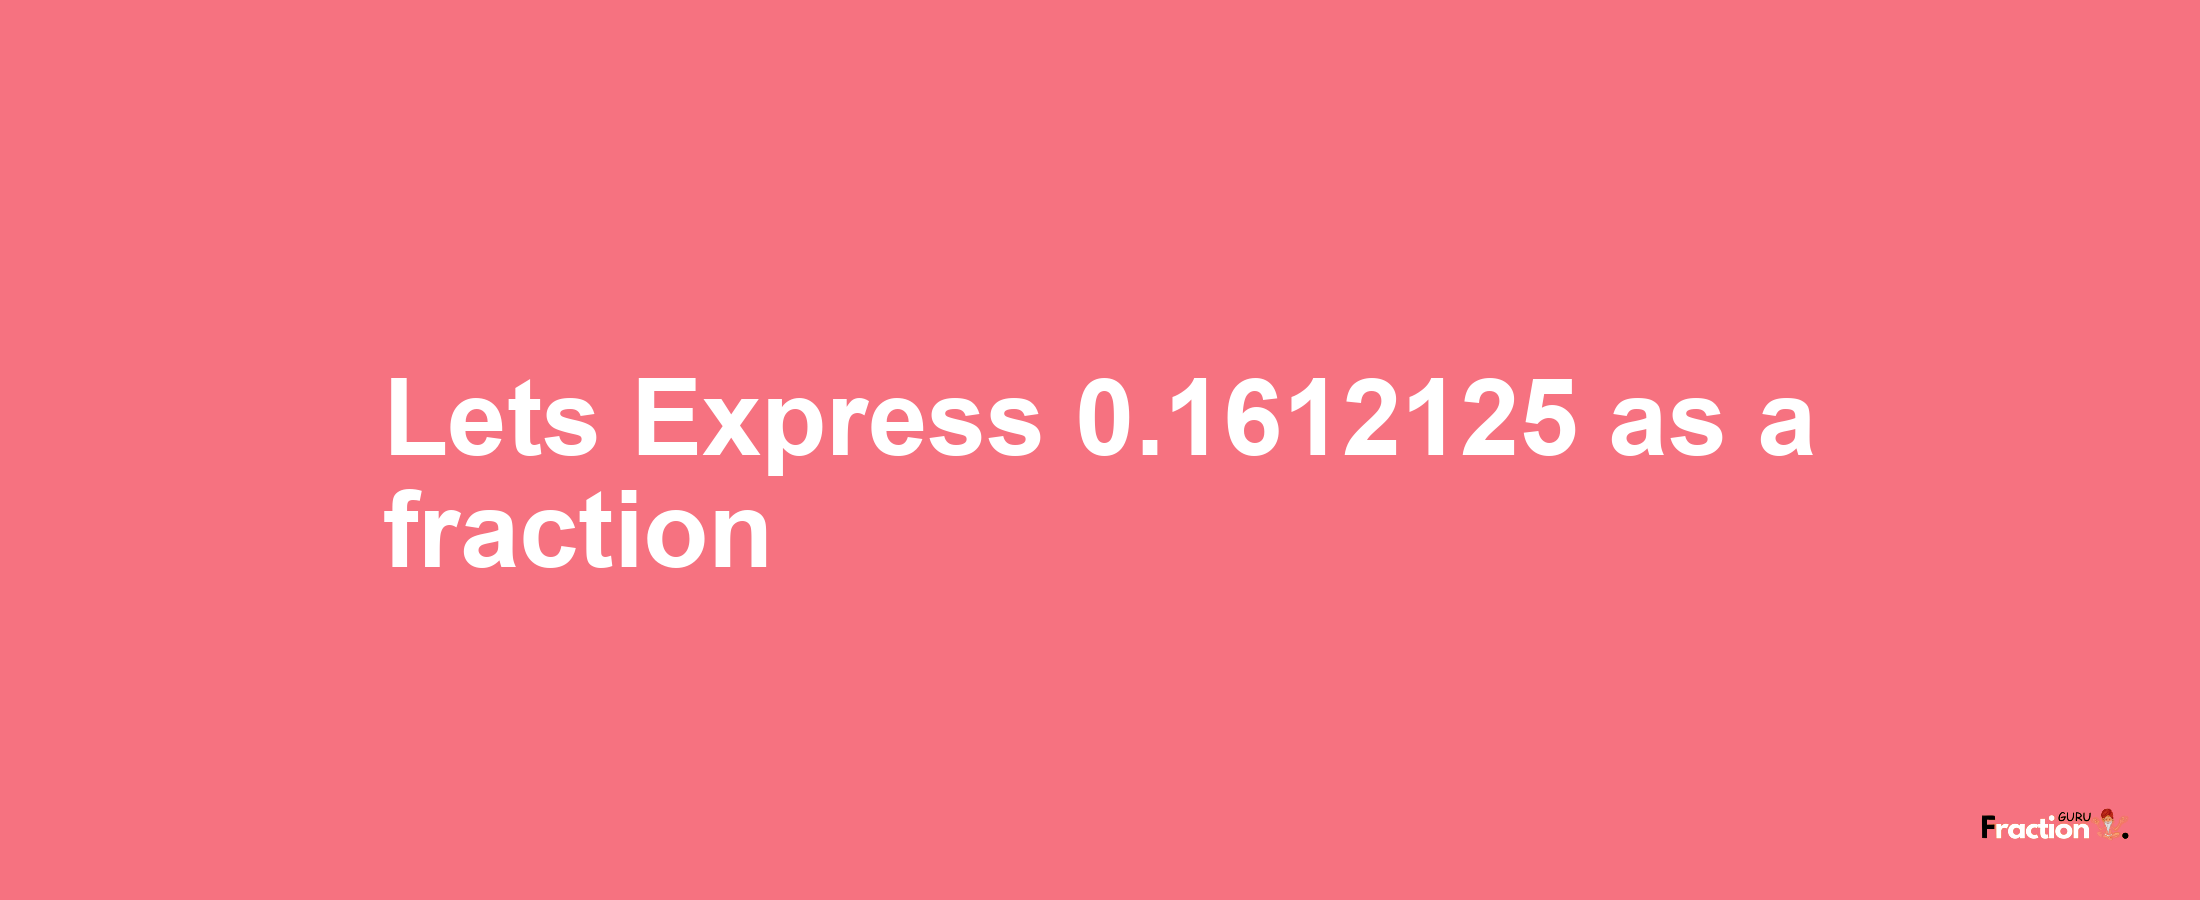 Lets Express 0.1612125 as afraction